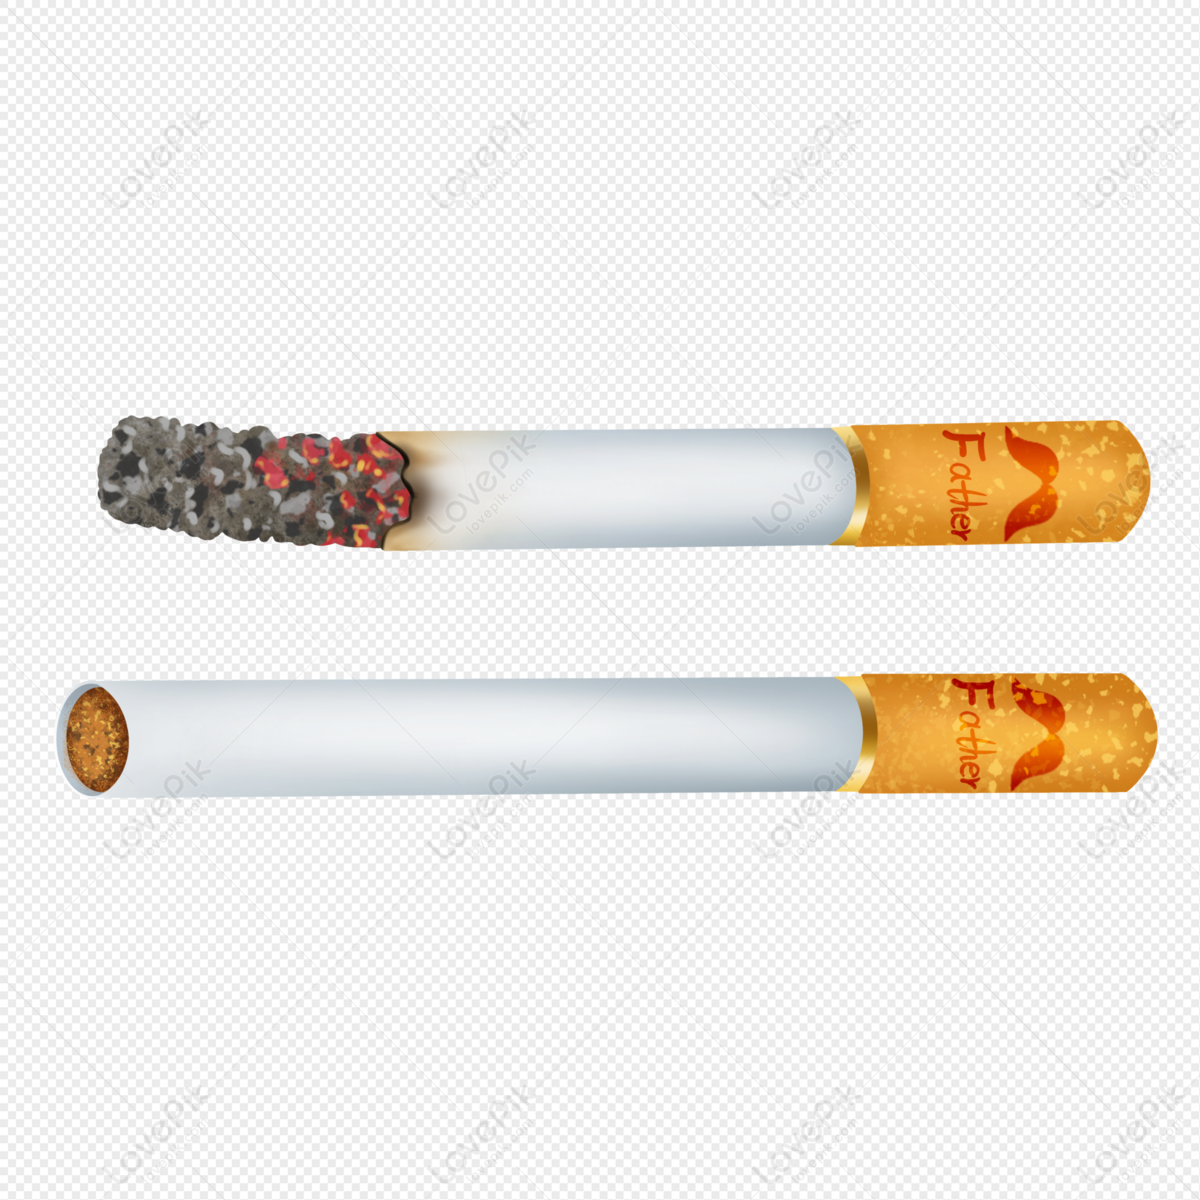 Simulation Cigarette PNG Transparent Background And Clipart Image For Free  Download - Lovepik | 401752580